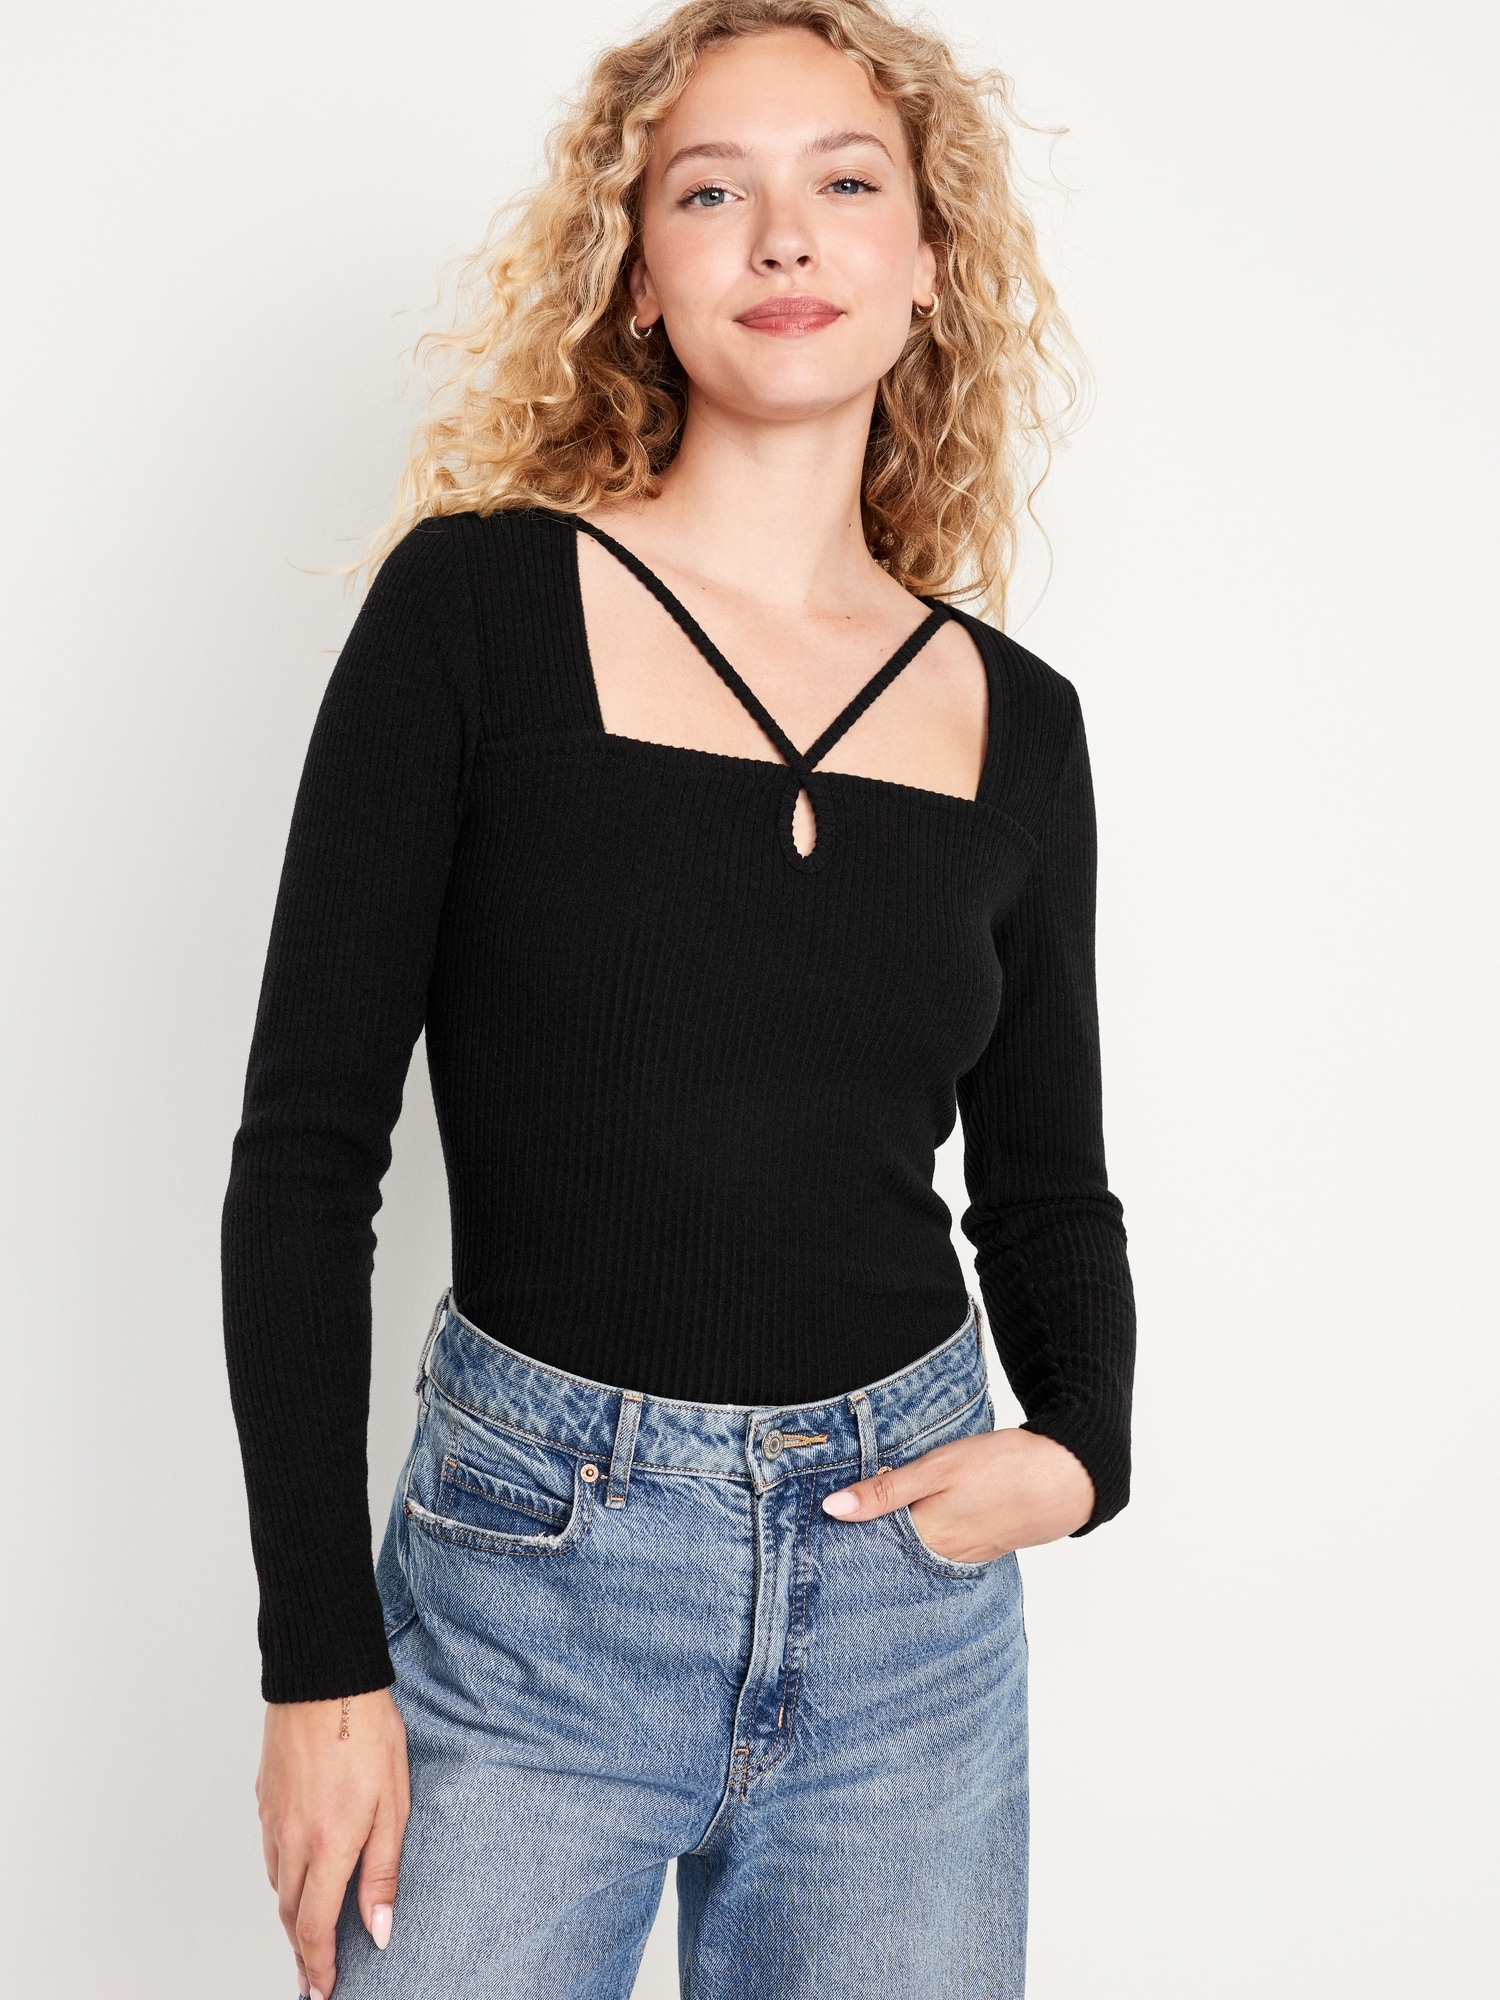 Long-Sleeve Strappy Women Fitted for Old Navy Top Keyhole |